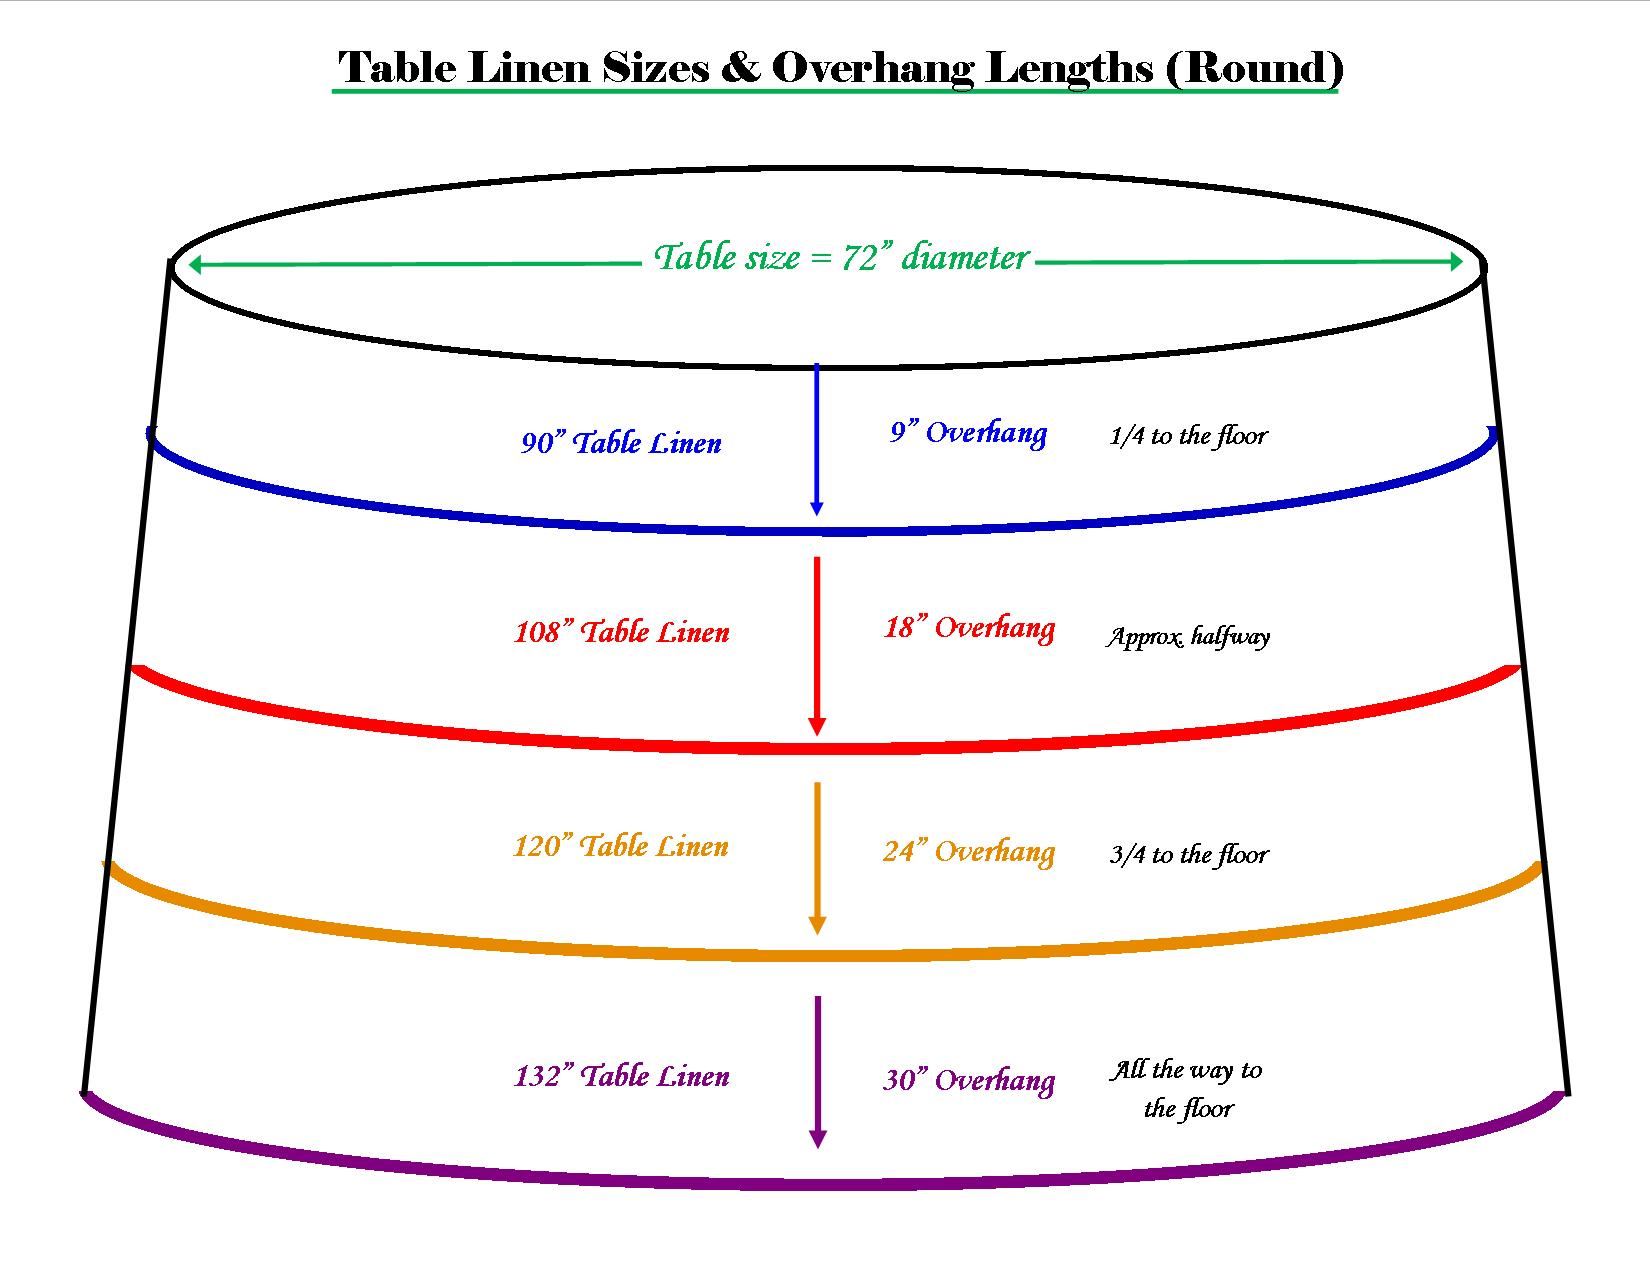 Table Linen Information, What Size Tablecloth Do I Need For A Round Table That Seats 8